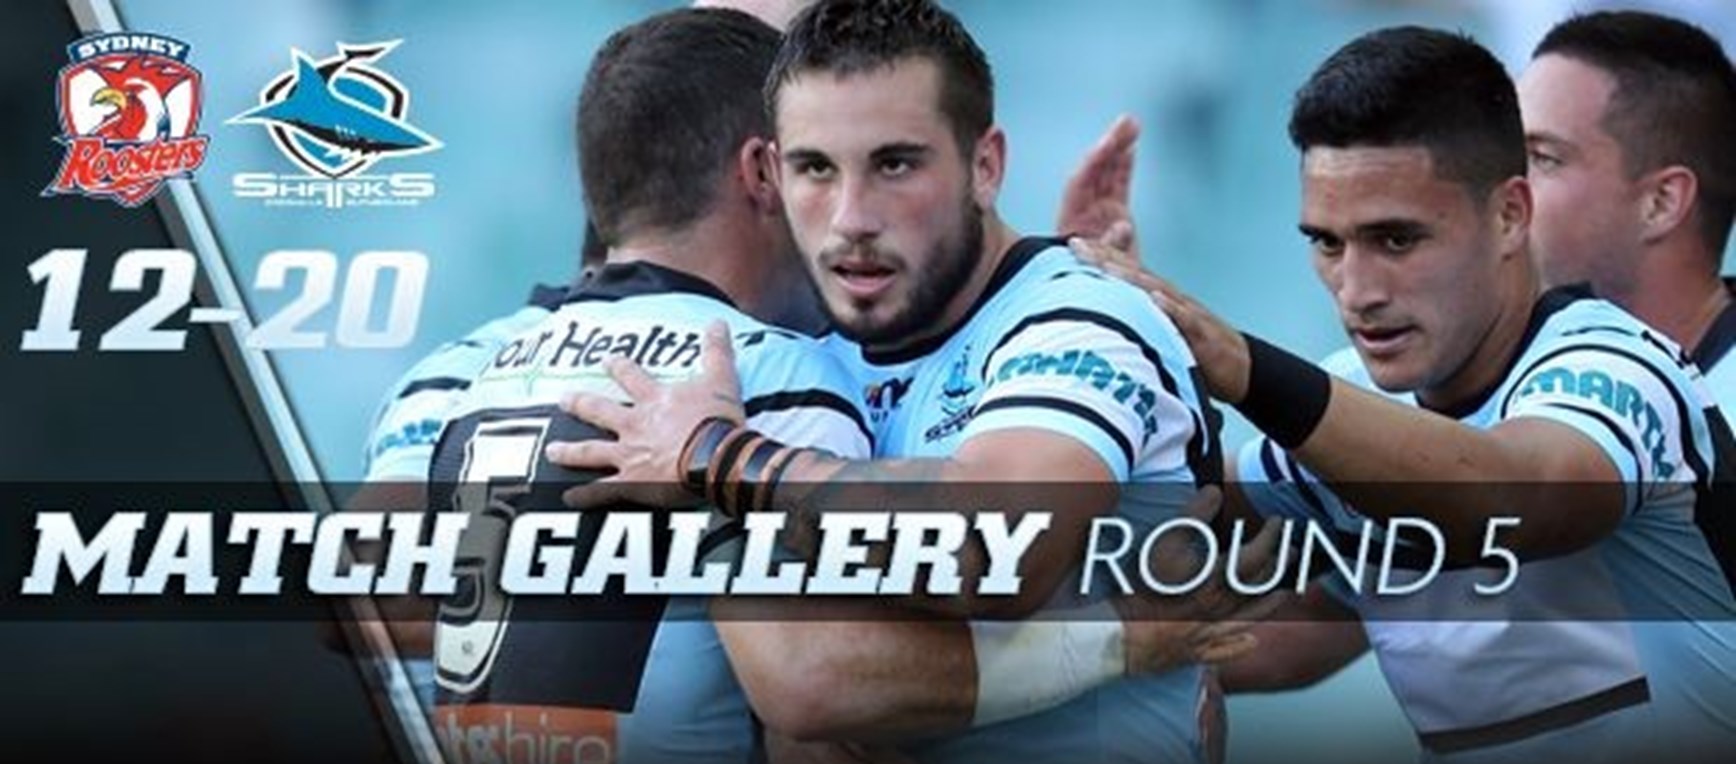 Match Gallery - Rd 5 Roosters v Sharks